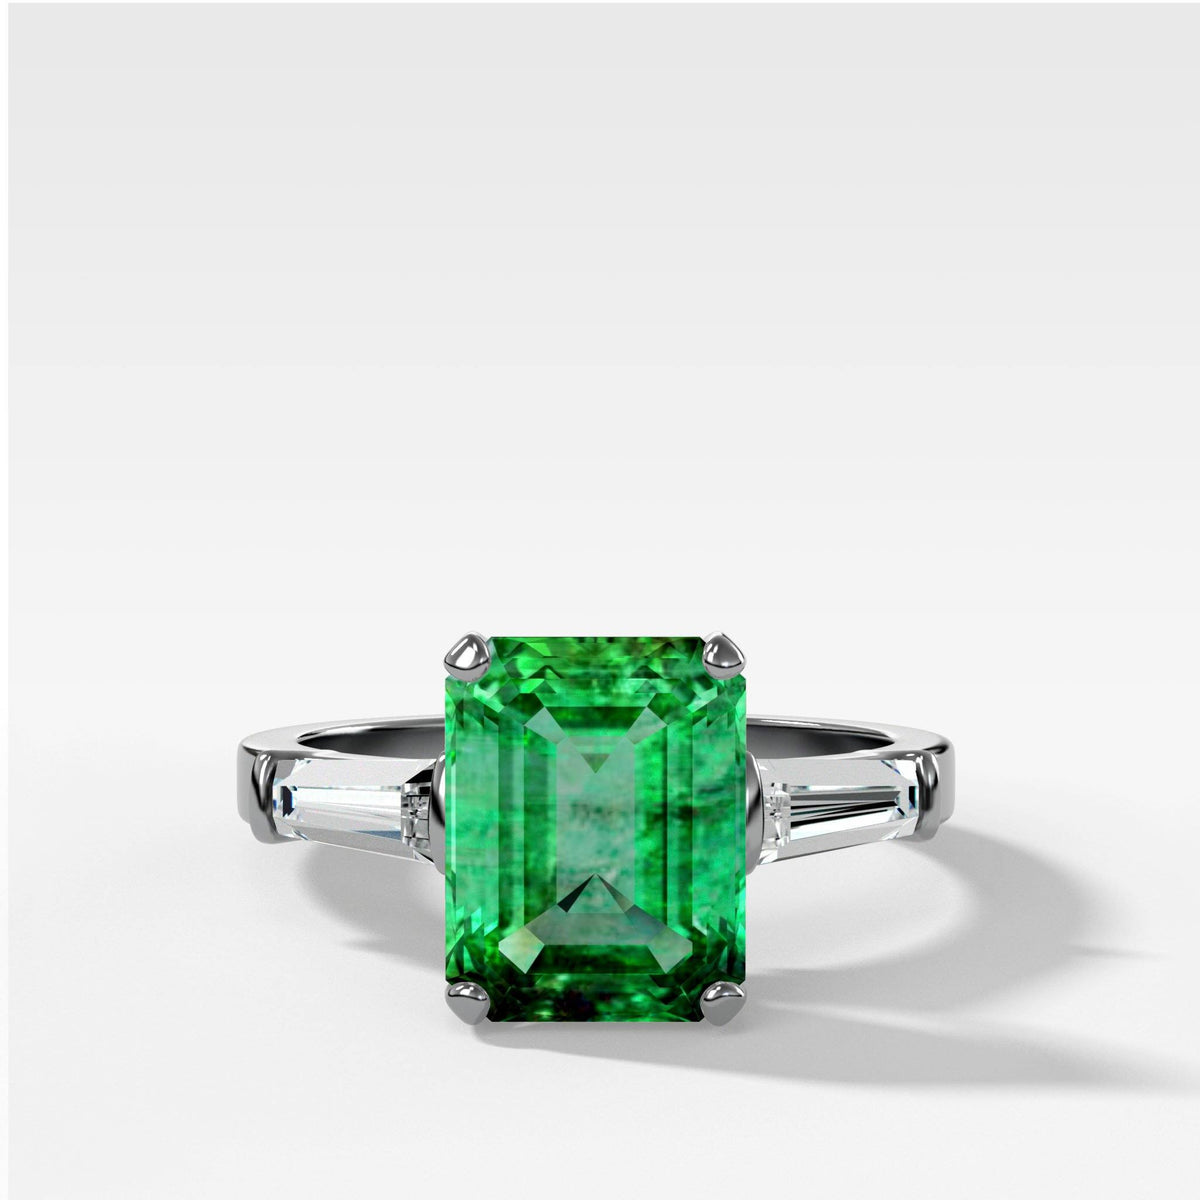 Emerald cut Emerald Translunar Ring with Tapered Baguette Diamond sides by Good Stone in White Gold